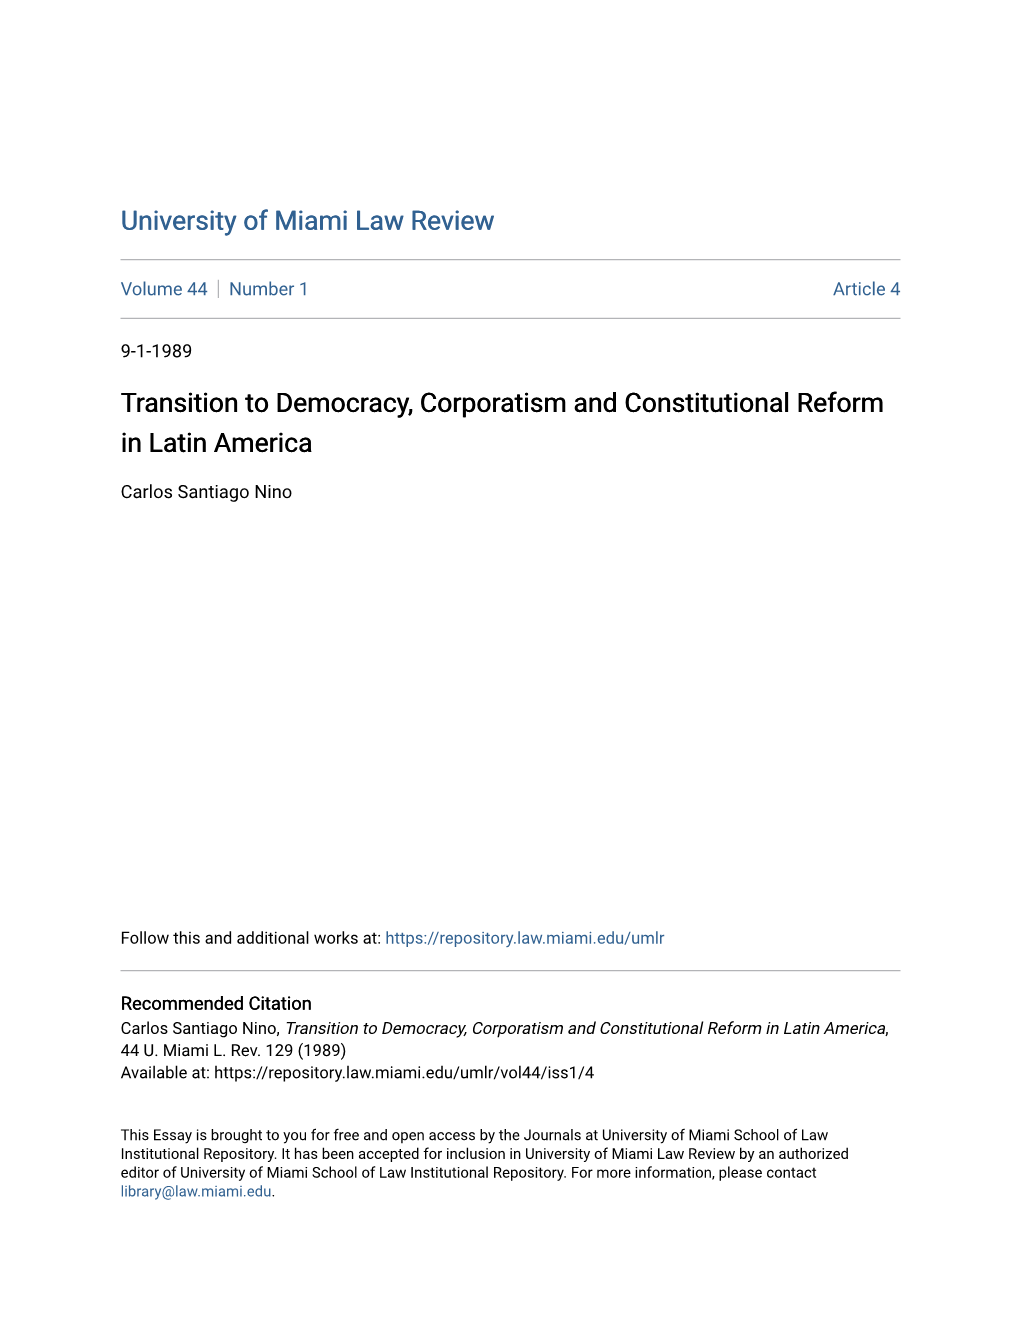 Transition to Democracy, Corporatism and Constitutional Reform in Latin America